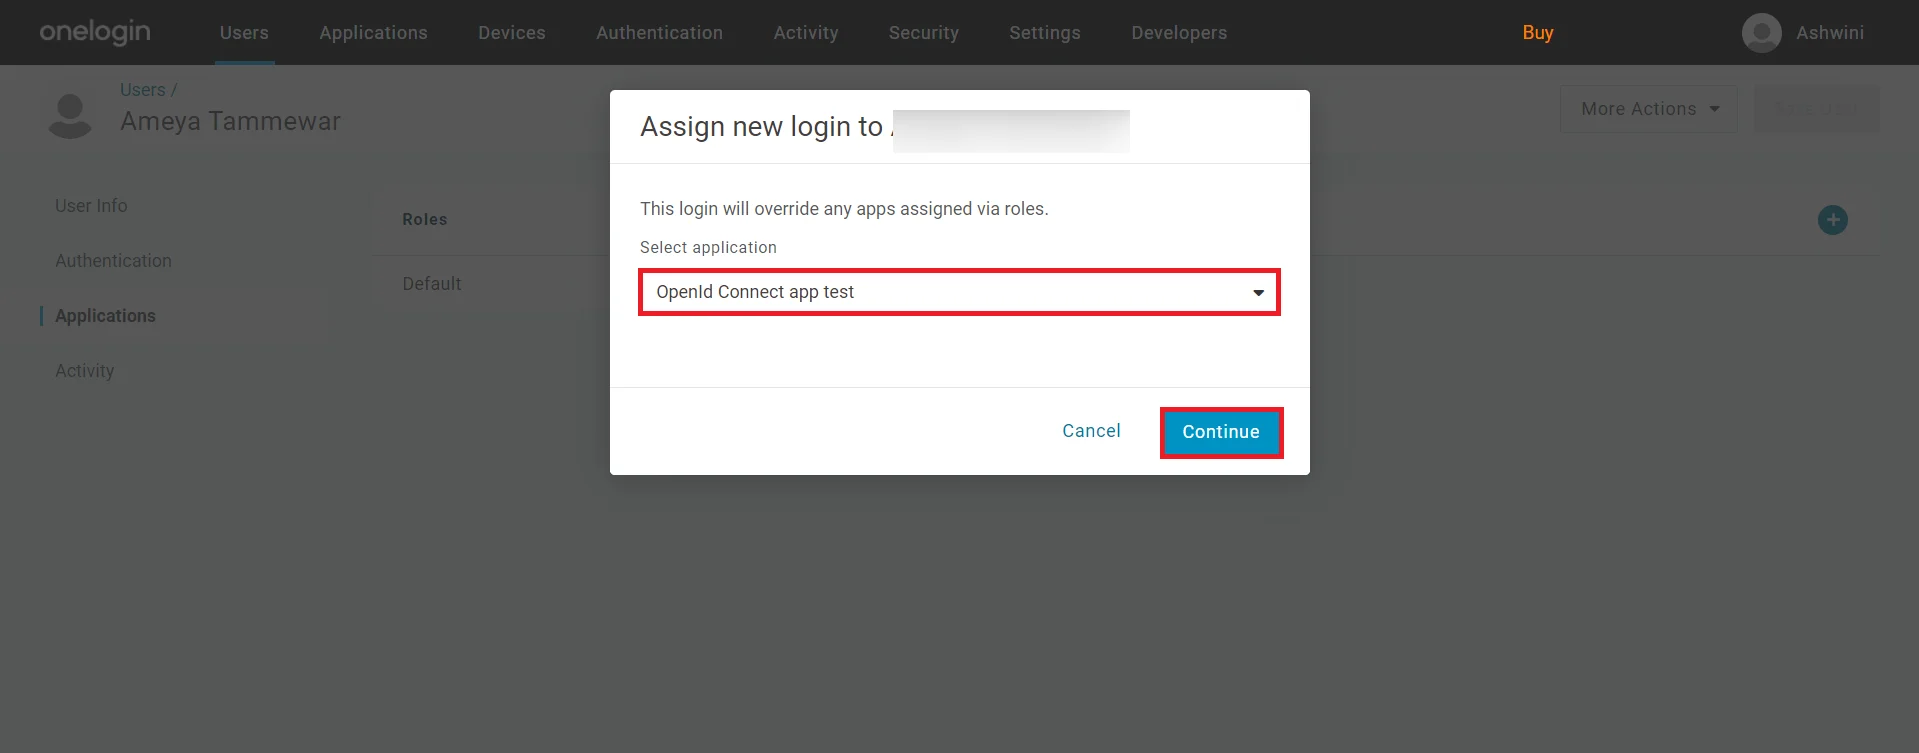 Secure Access with OneLogin Single Sign-On (SSO) Typo3 OneLogin allow SSO